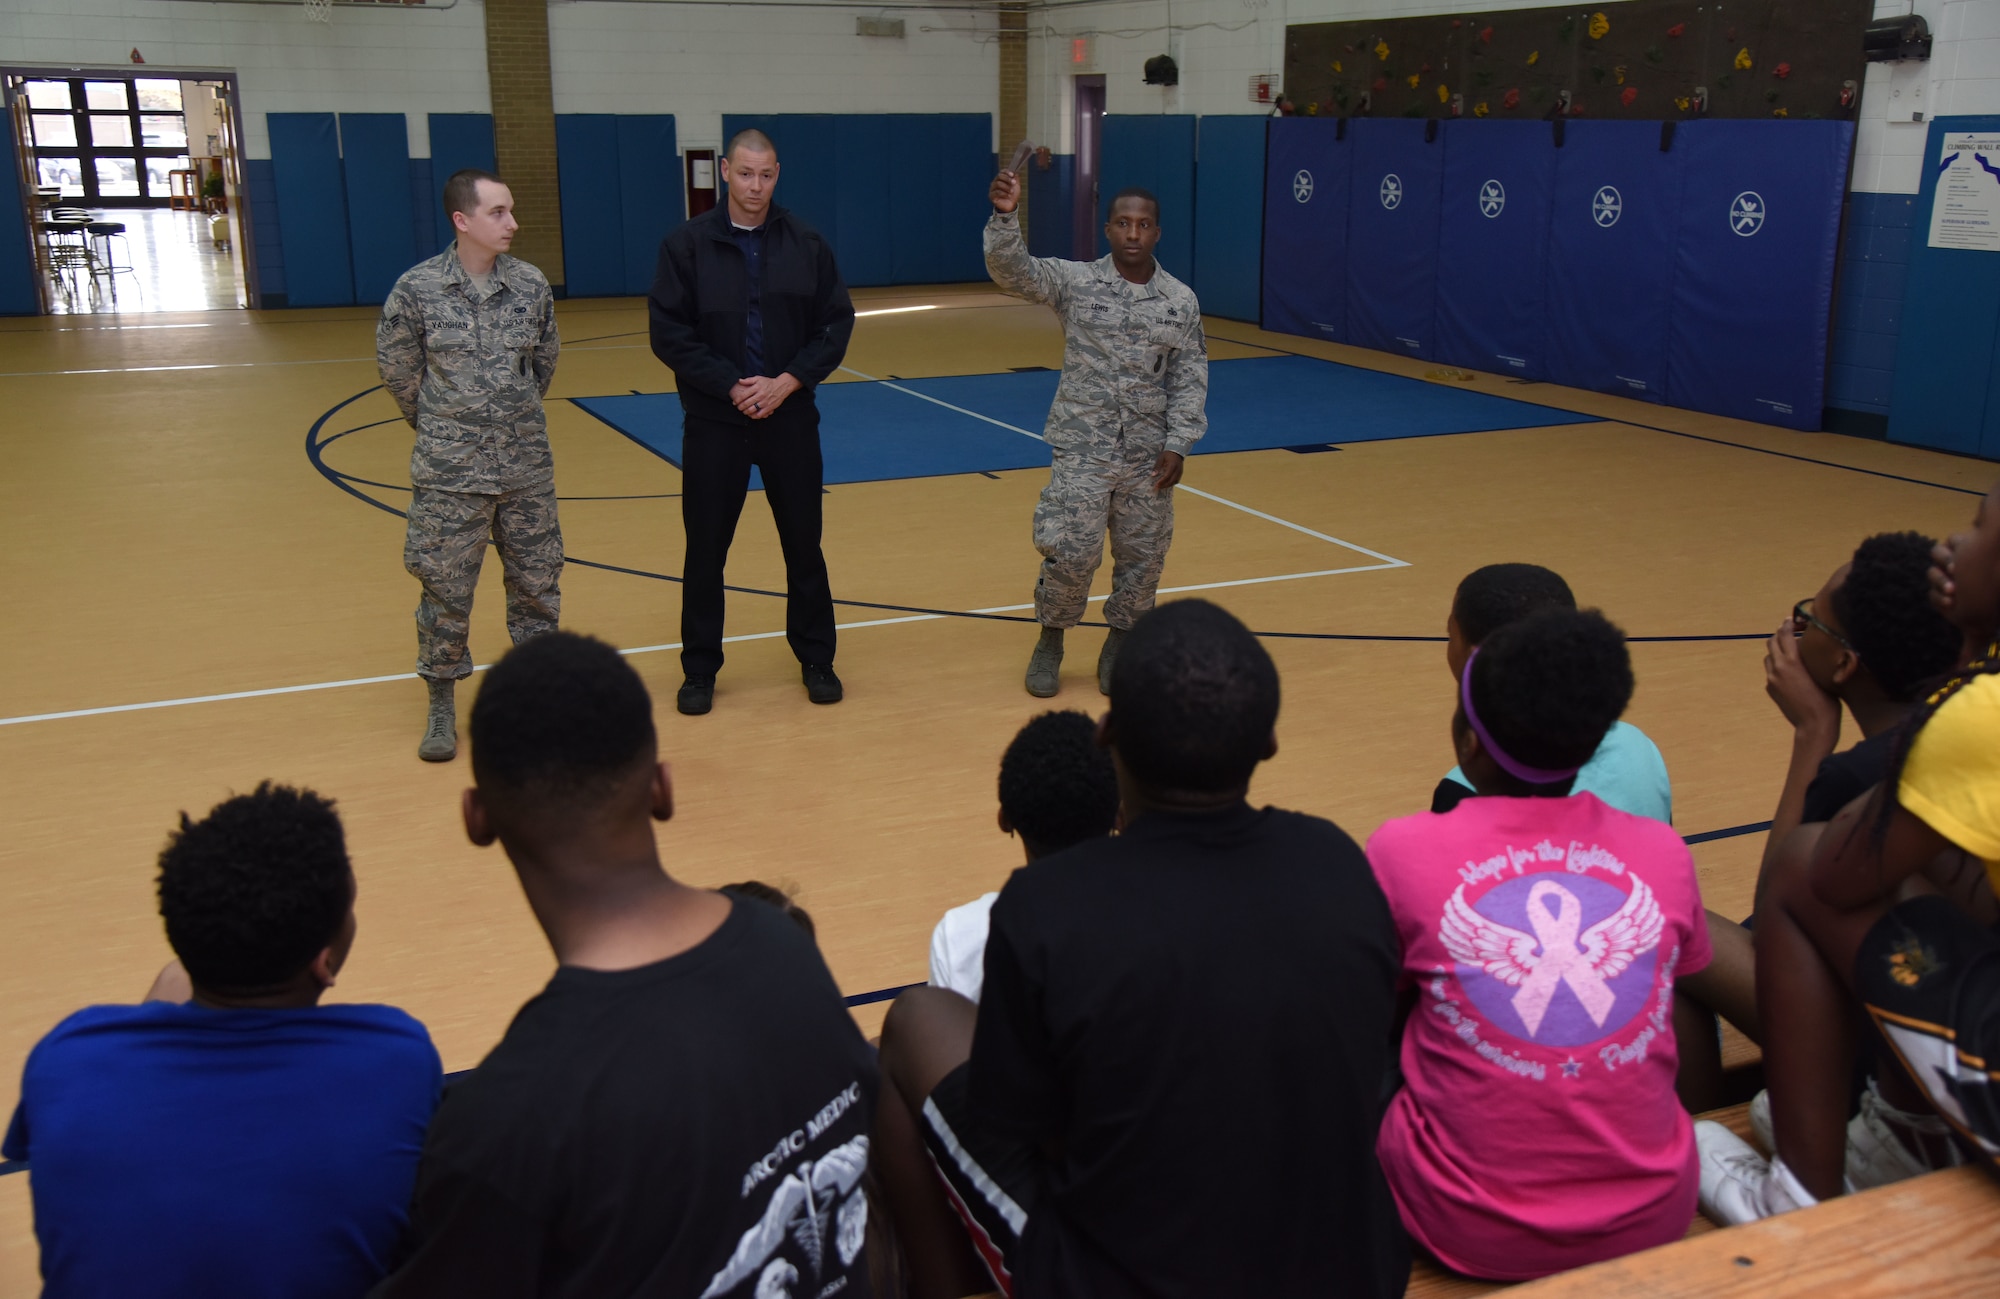 Senior Airman James Vaughn, 81st Security Forces Squadron training instructor, Justin Depew, 81st SFS patrolman, and Master Sgt. Cordarius Lewis, 81st SFS operations NCO in charge, discuss safety procedures during lockdown training at the Keesler Youth Center March 8, 2018, on Keesler Air Force Base, Mississippi. In lieu of recent active shooter incidents in schools, defenders conducted the training to discuss school safety during a potential active shooter situation. (U.S. Air Force photo by Kemberly Groue)